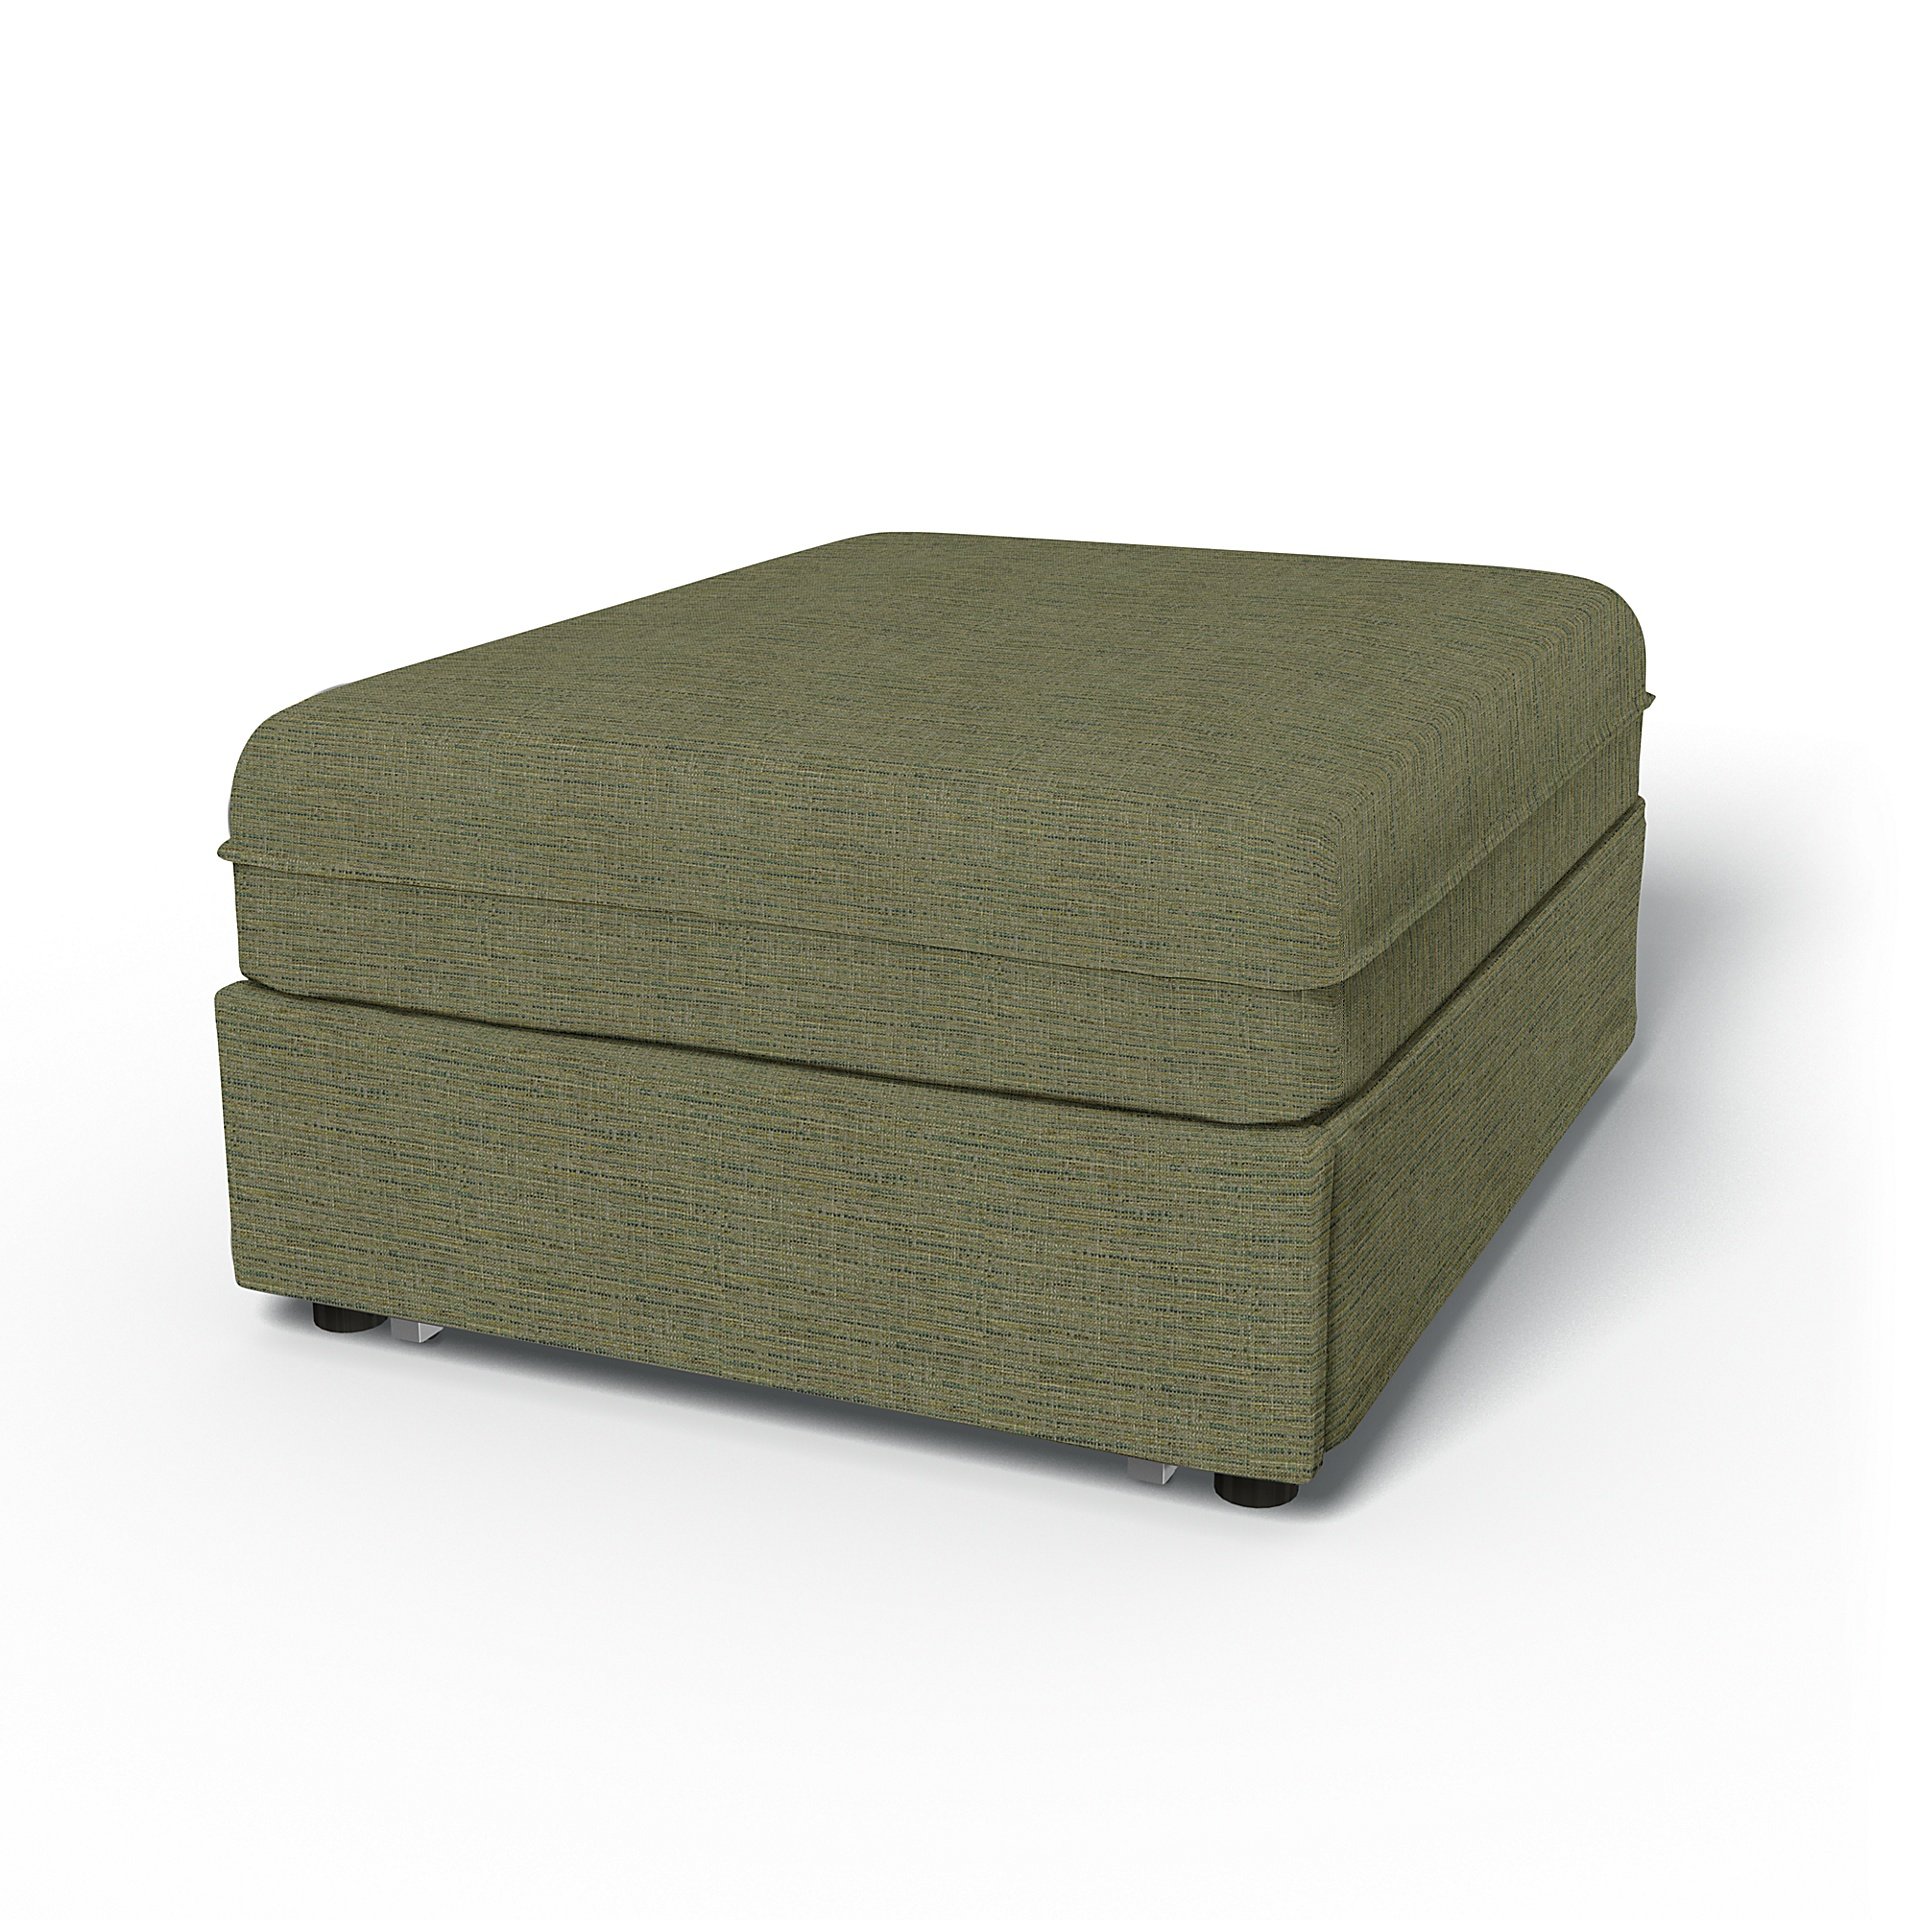 IKEA - Vallentuna Seat Module with Sofa Bed Cover 80x100cm 32x39in, Meadow Green, Boucle & Texture -